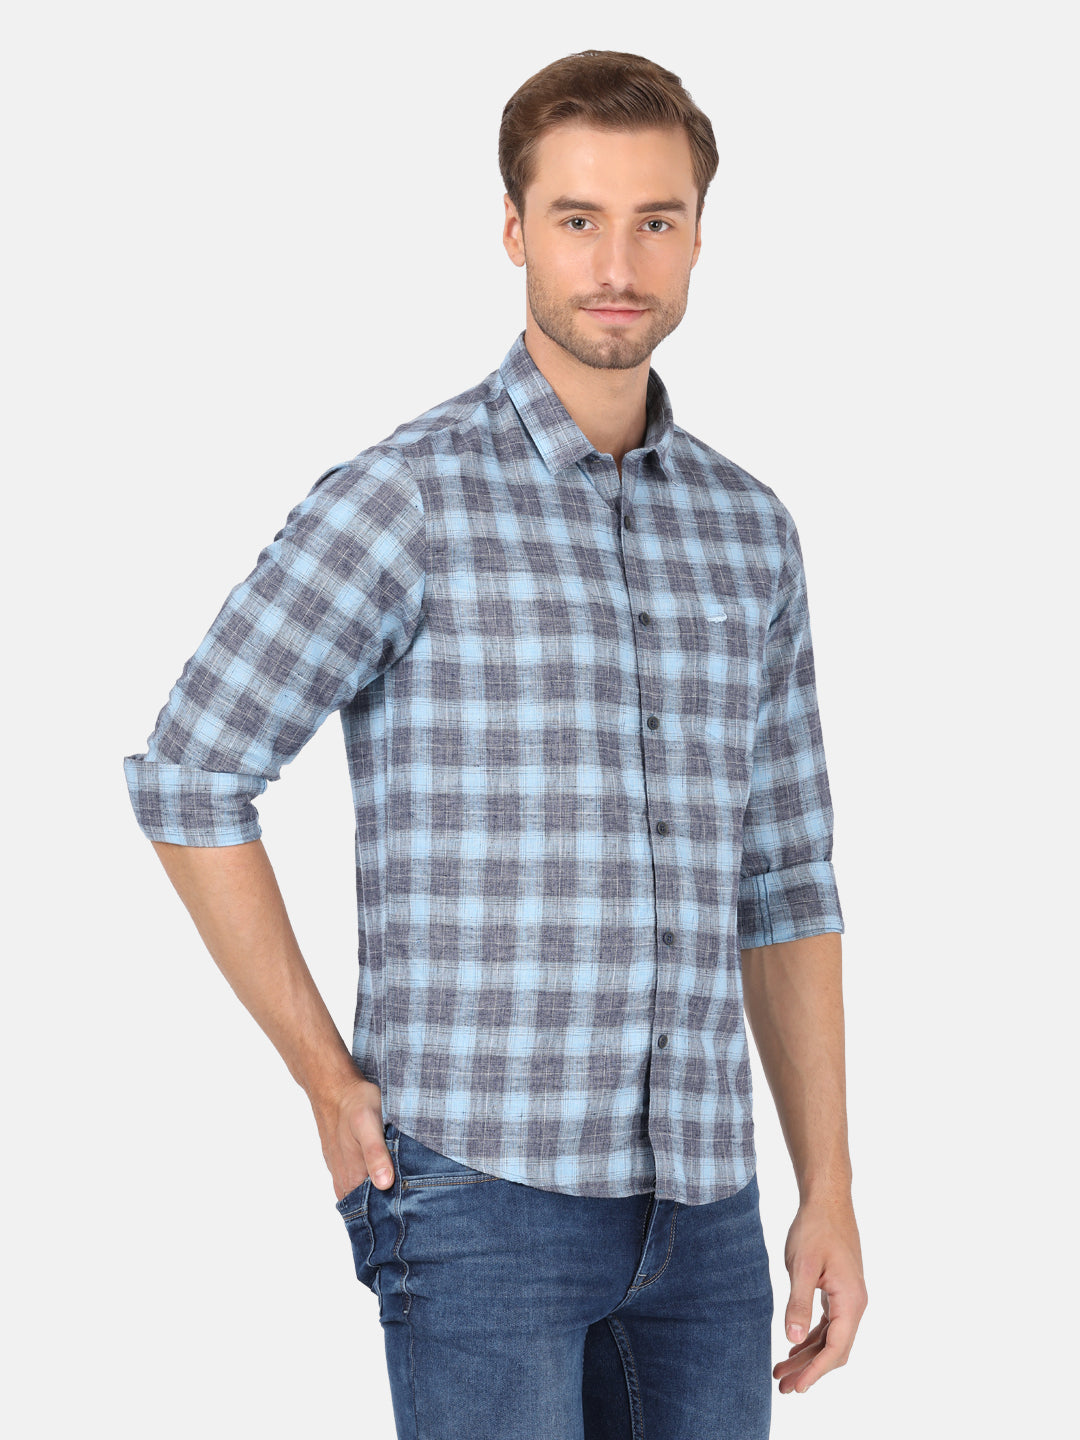 Casual Full Sleeve Comfort Fit Checks Blue with Collar Shirt for Men